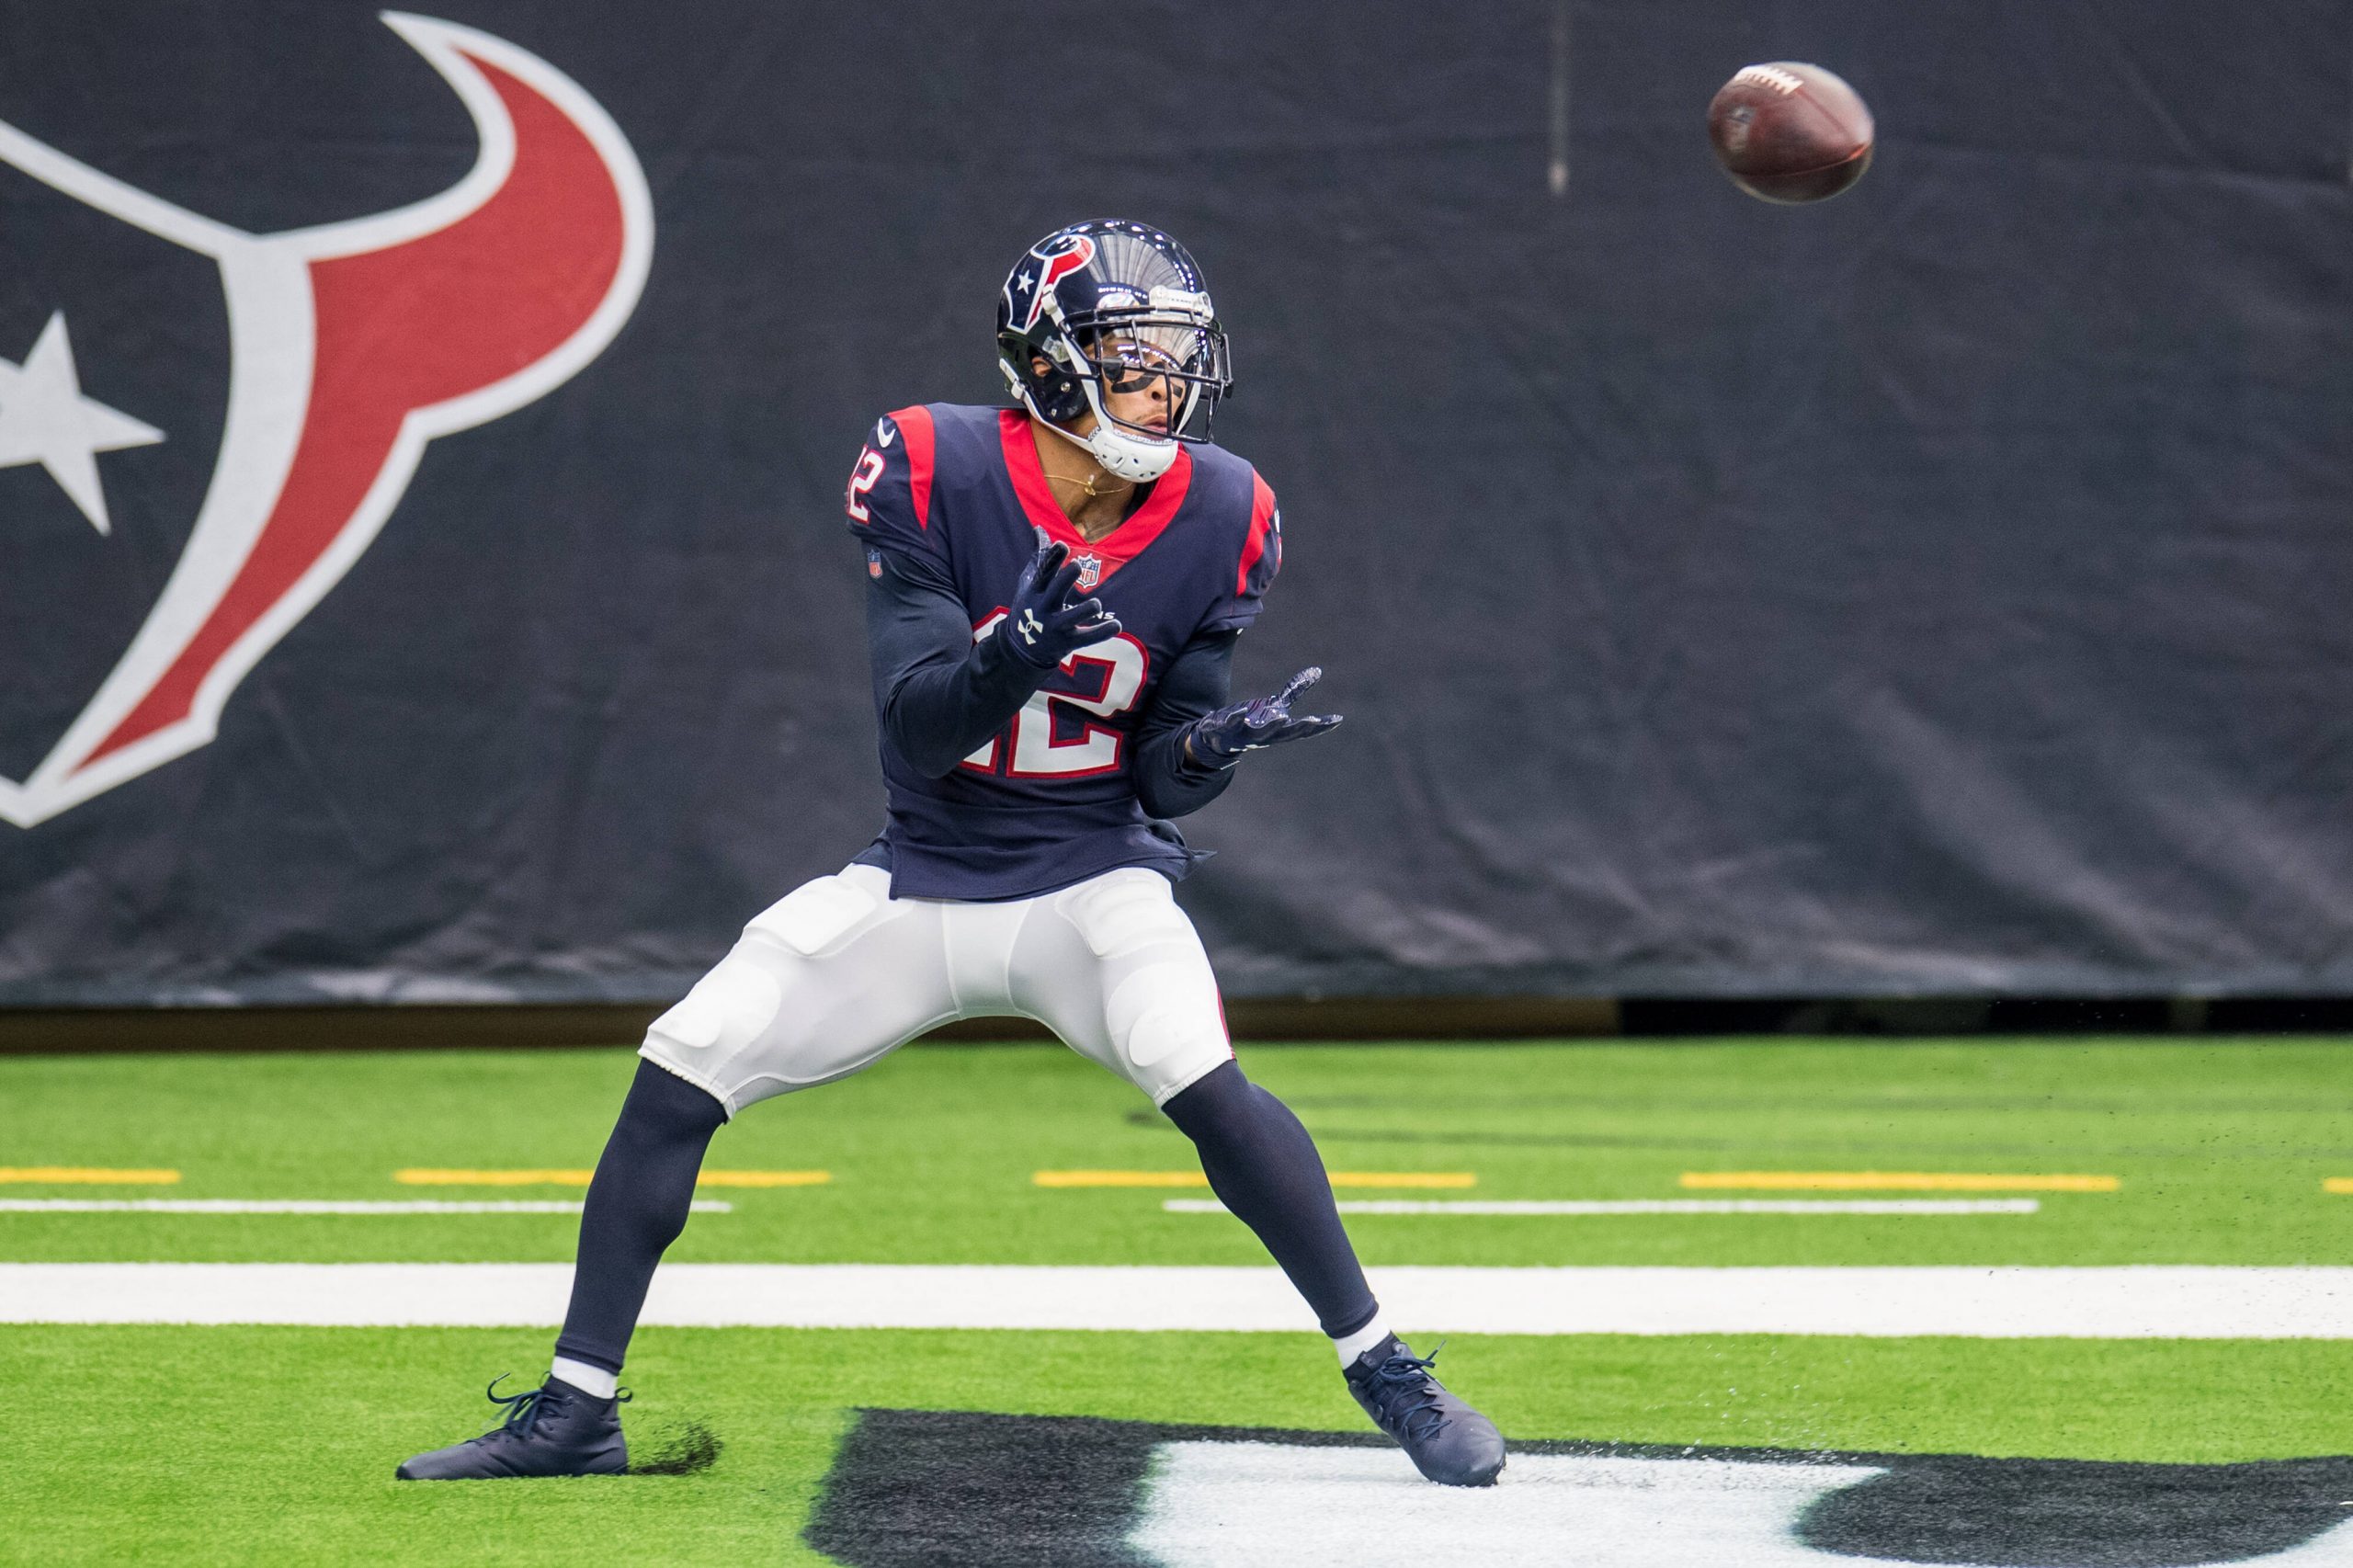 October 4, 2020: Houston Texans wide receiver Kenny Stills (12) makes a touchdown catch during the 4th quarter of an NFL